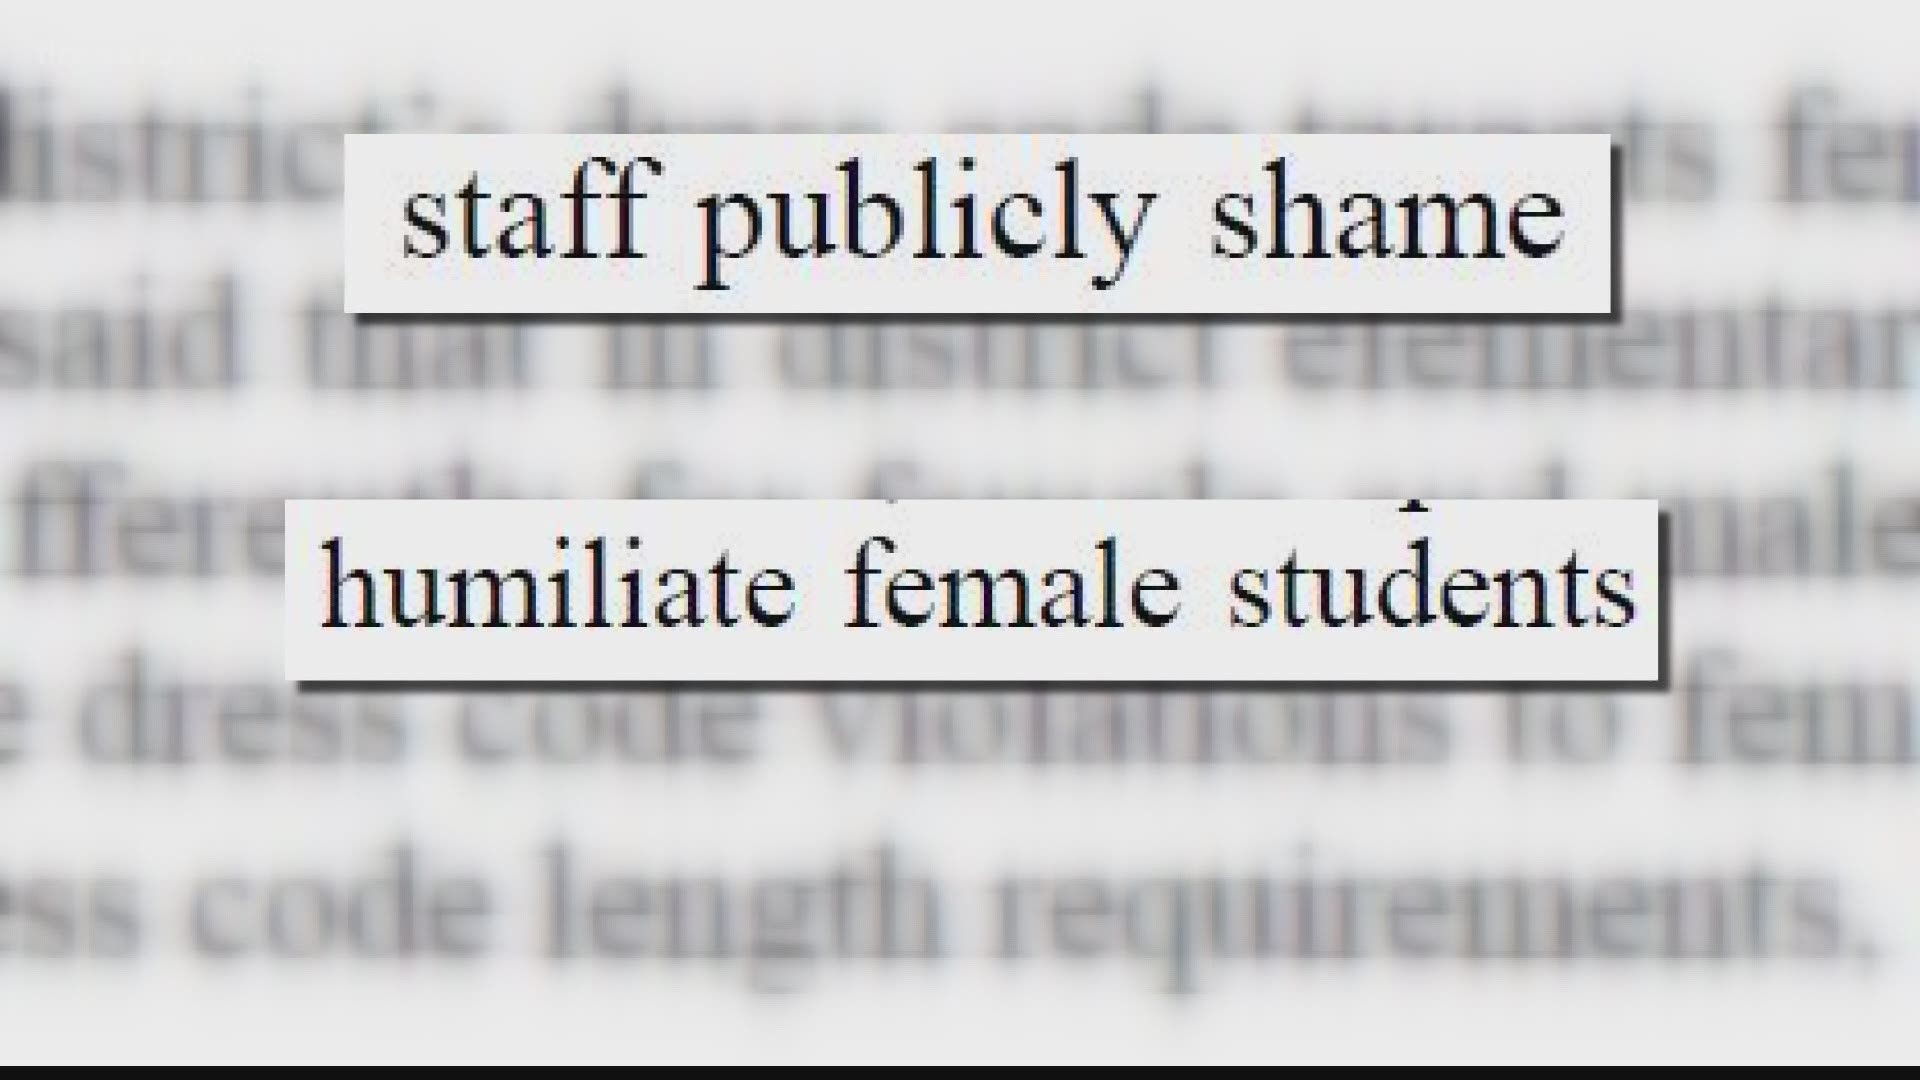 The complaint says the district's dress code is enforced differently for female students.